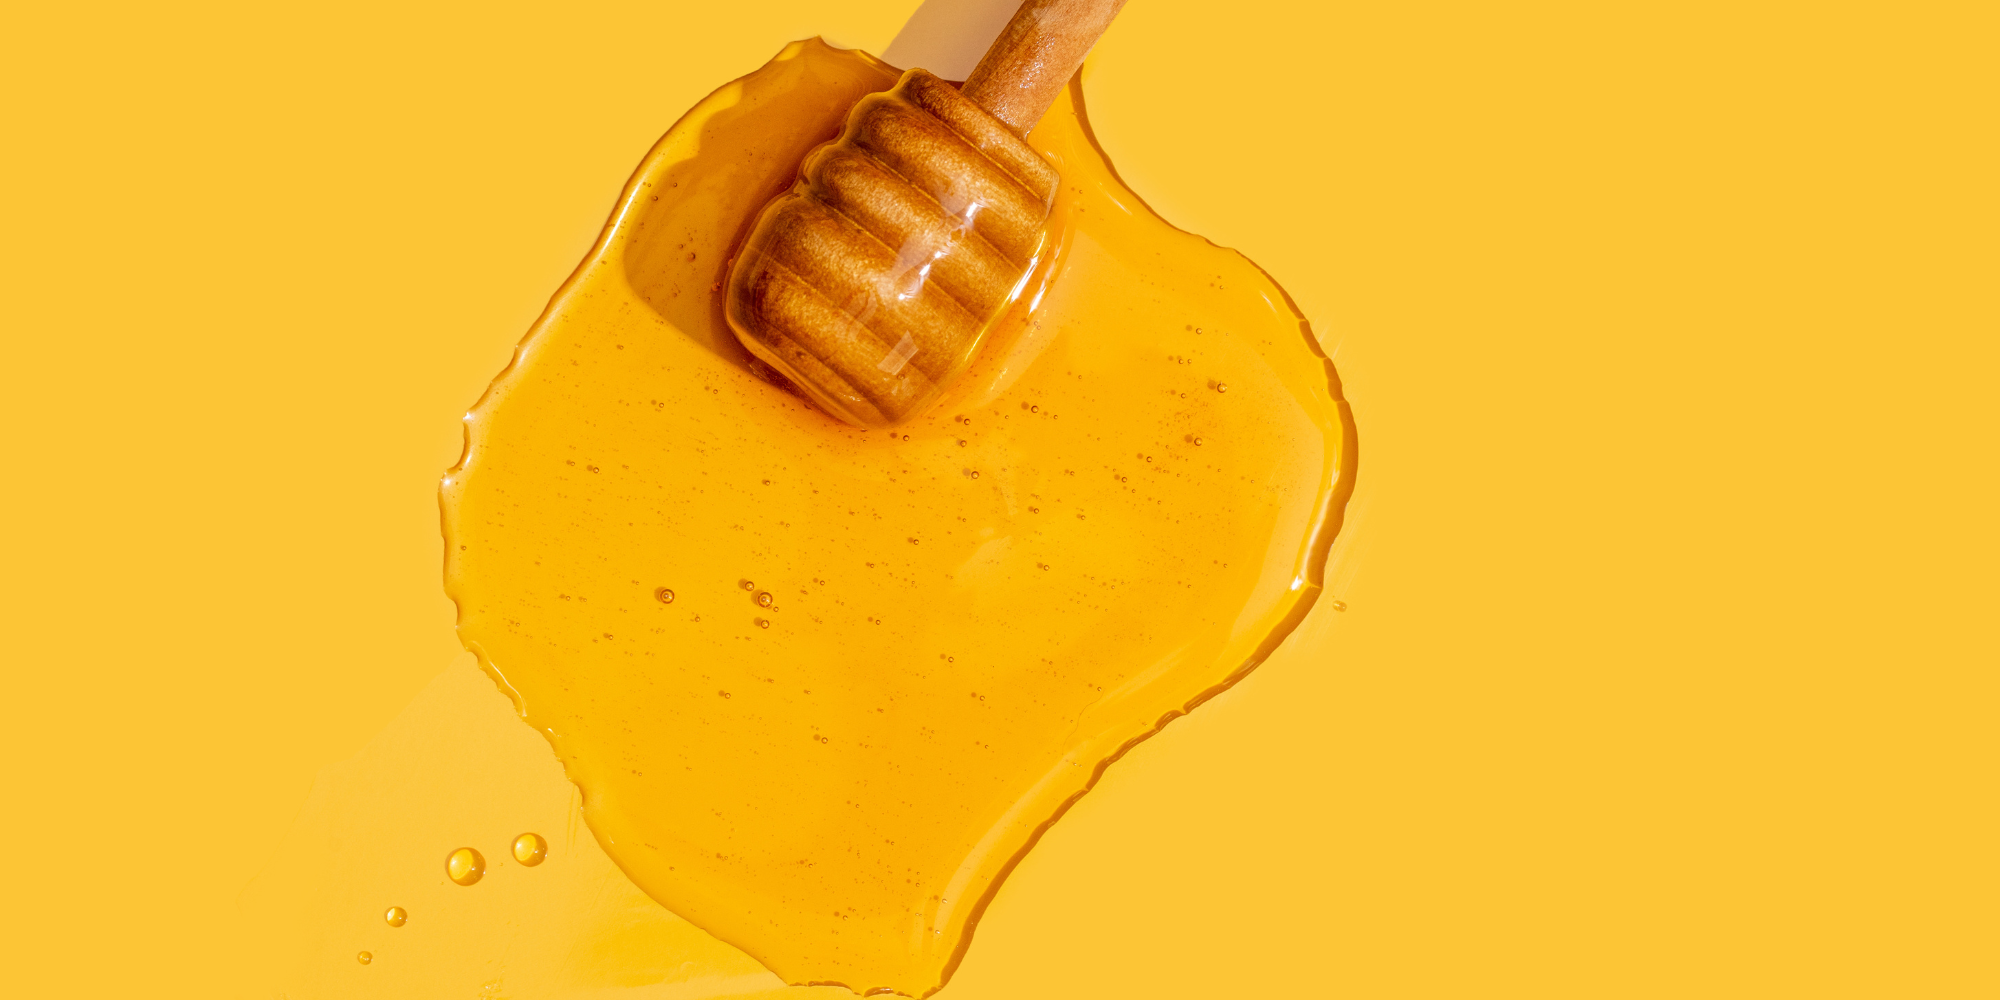 Honey stirrer full of honey lays on a yellow background. All around the stirrer is a blob of honey.